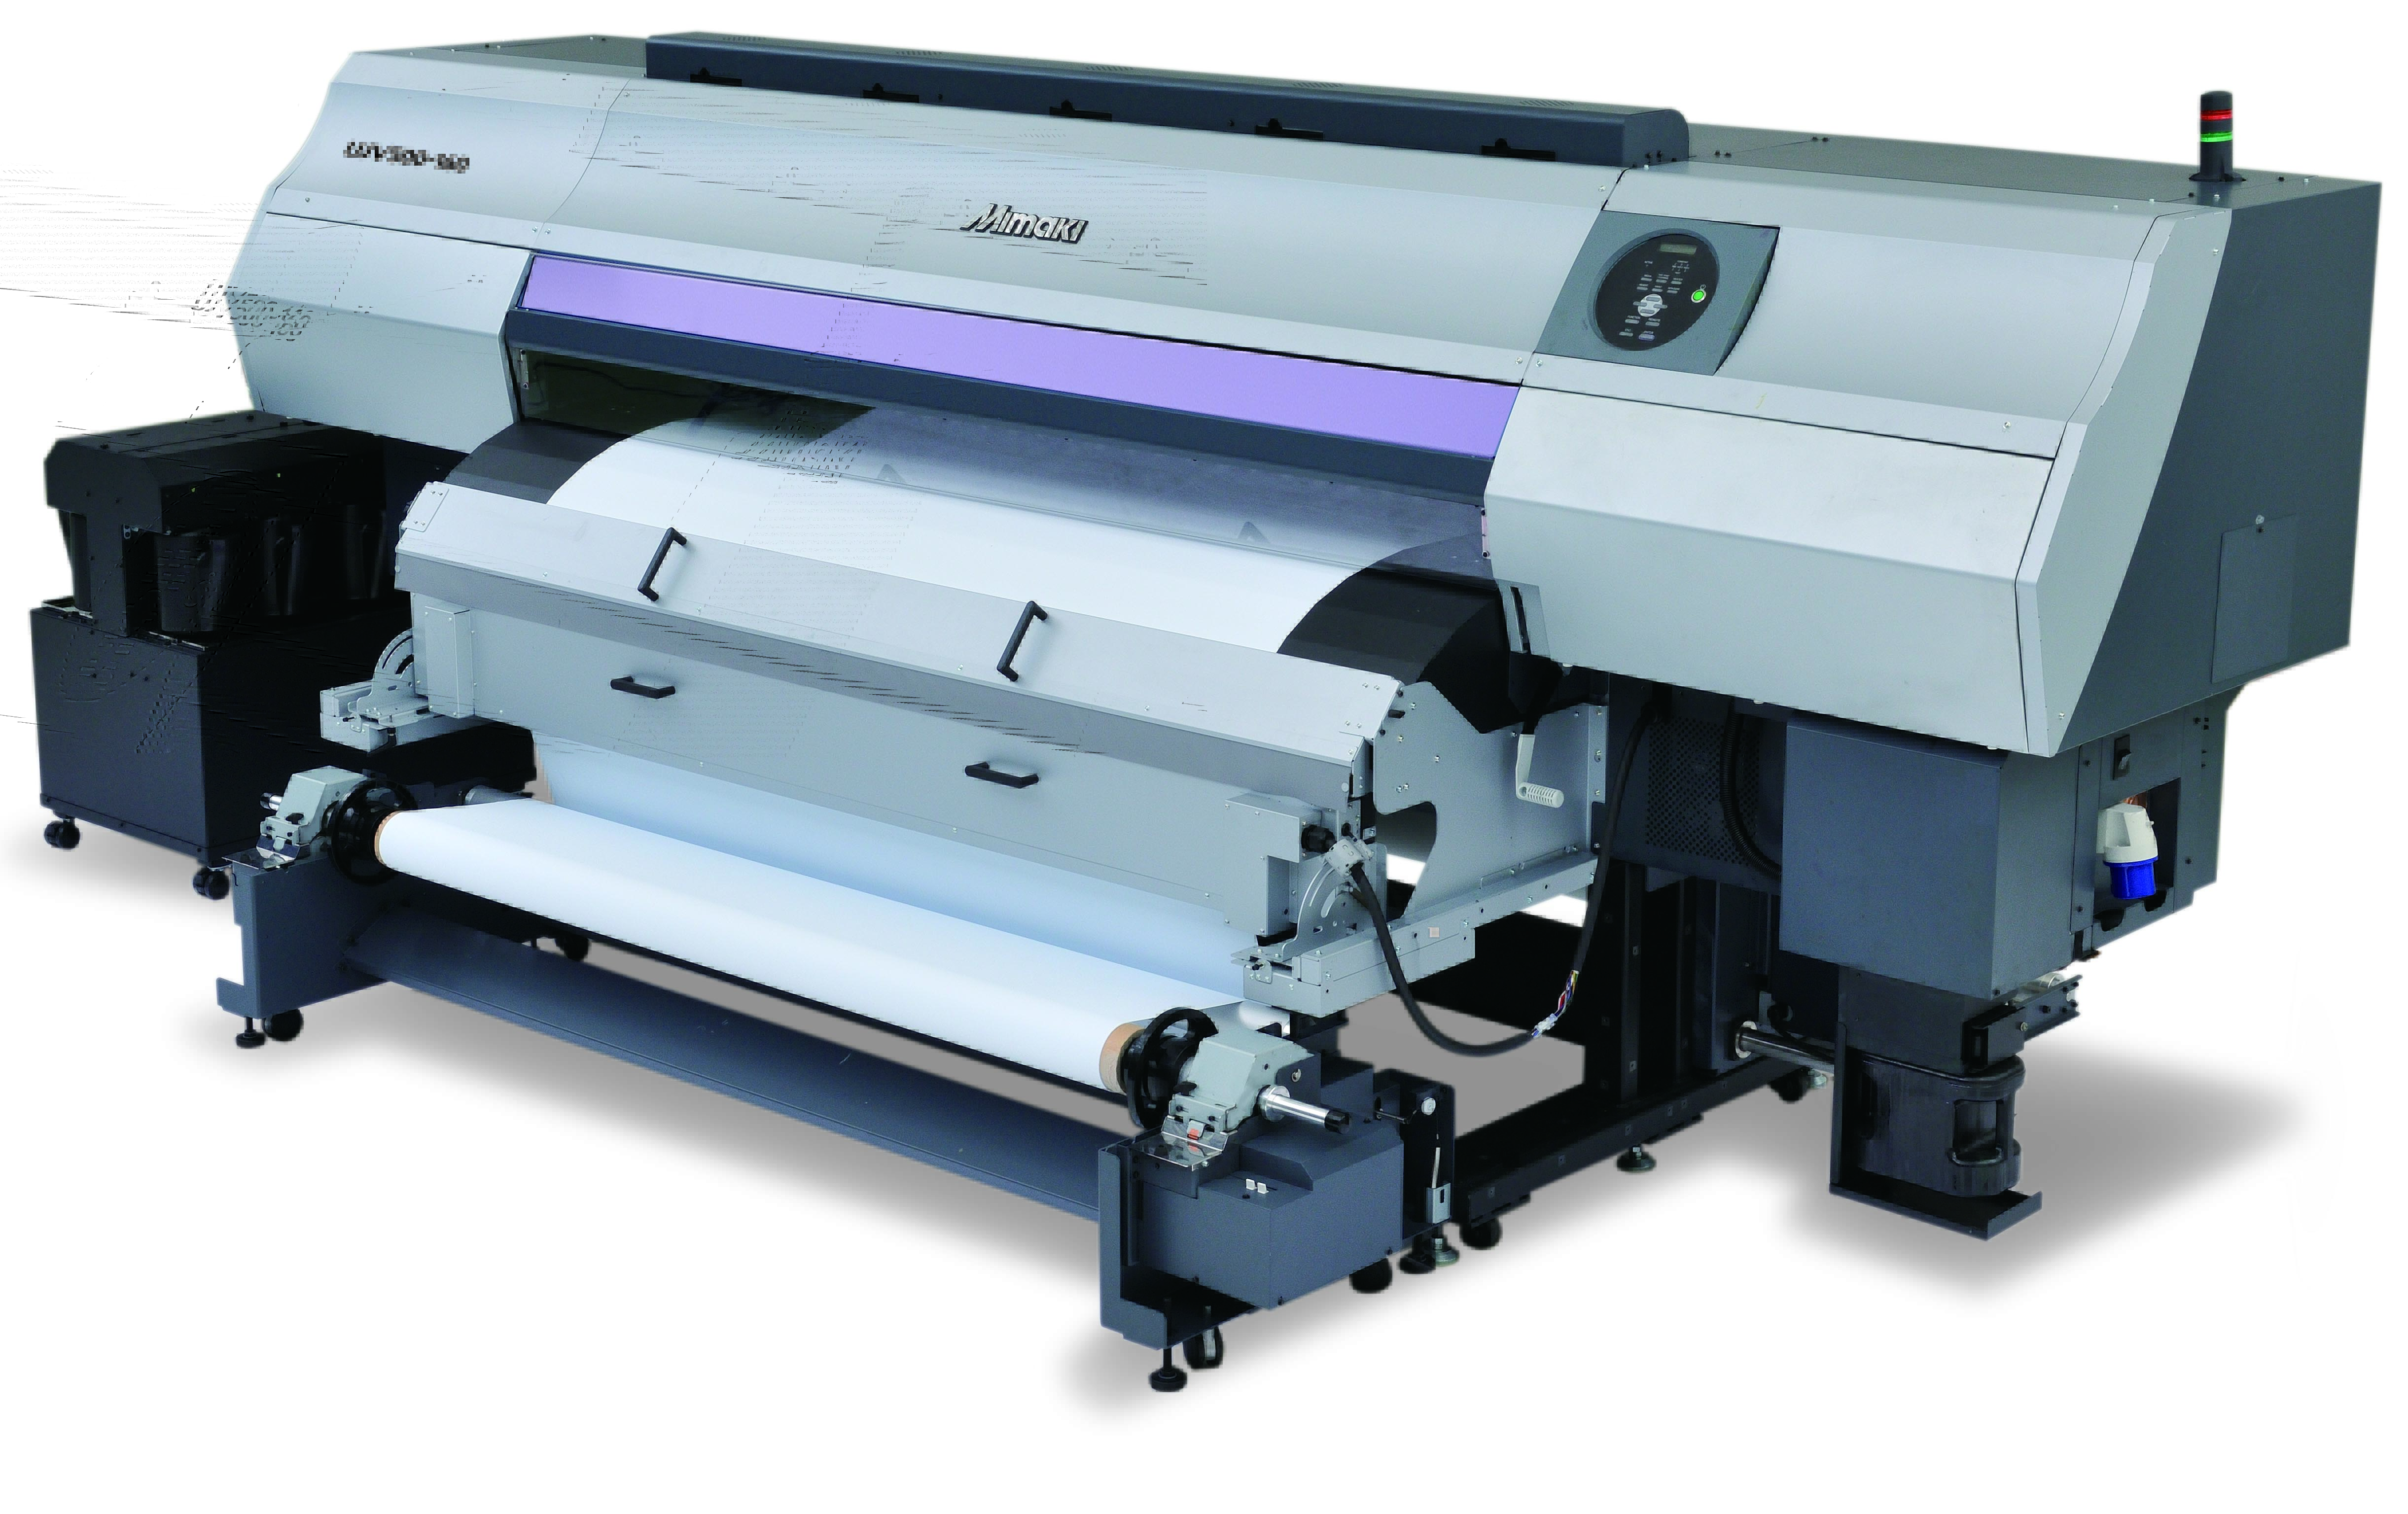 Companies investing in a Mimaki UJV500 LED UV roll-to-roll printer before the end of May 2015 will benefit from a 3 year war